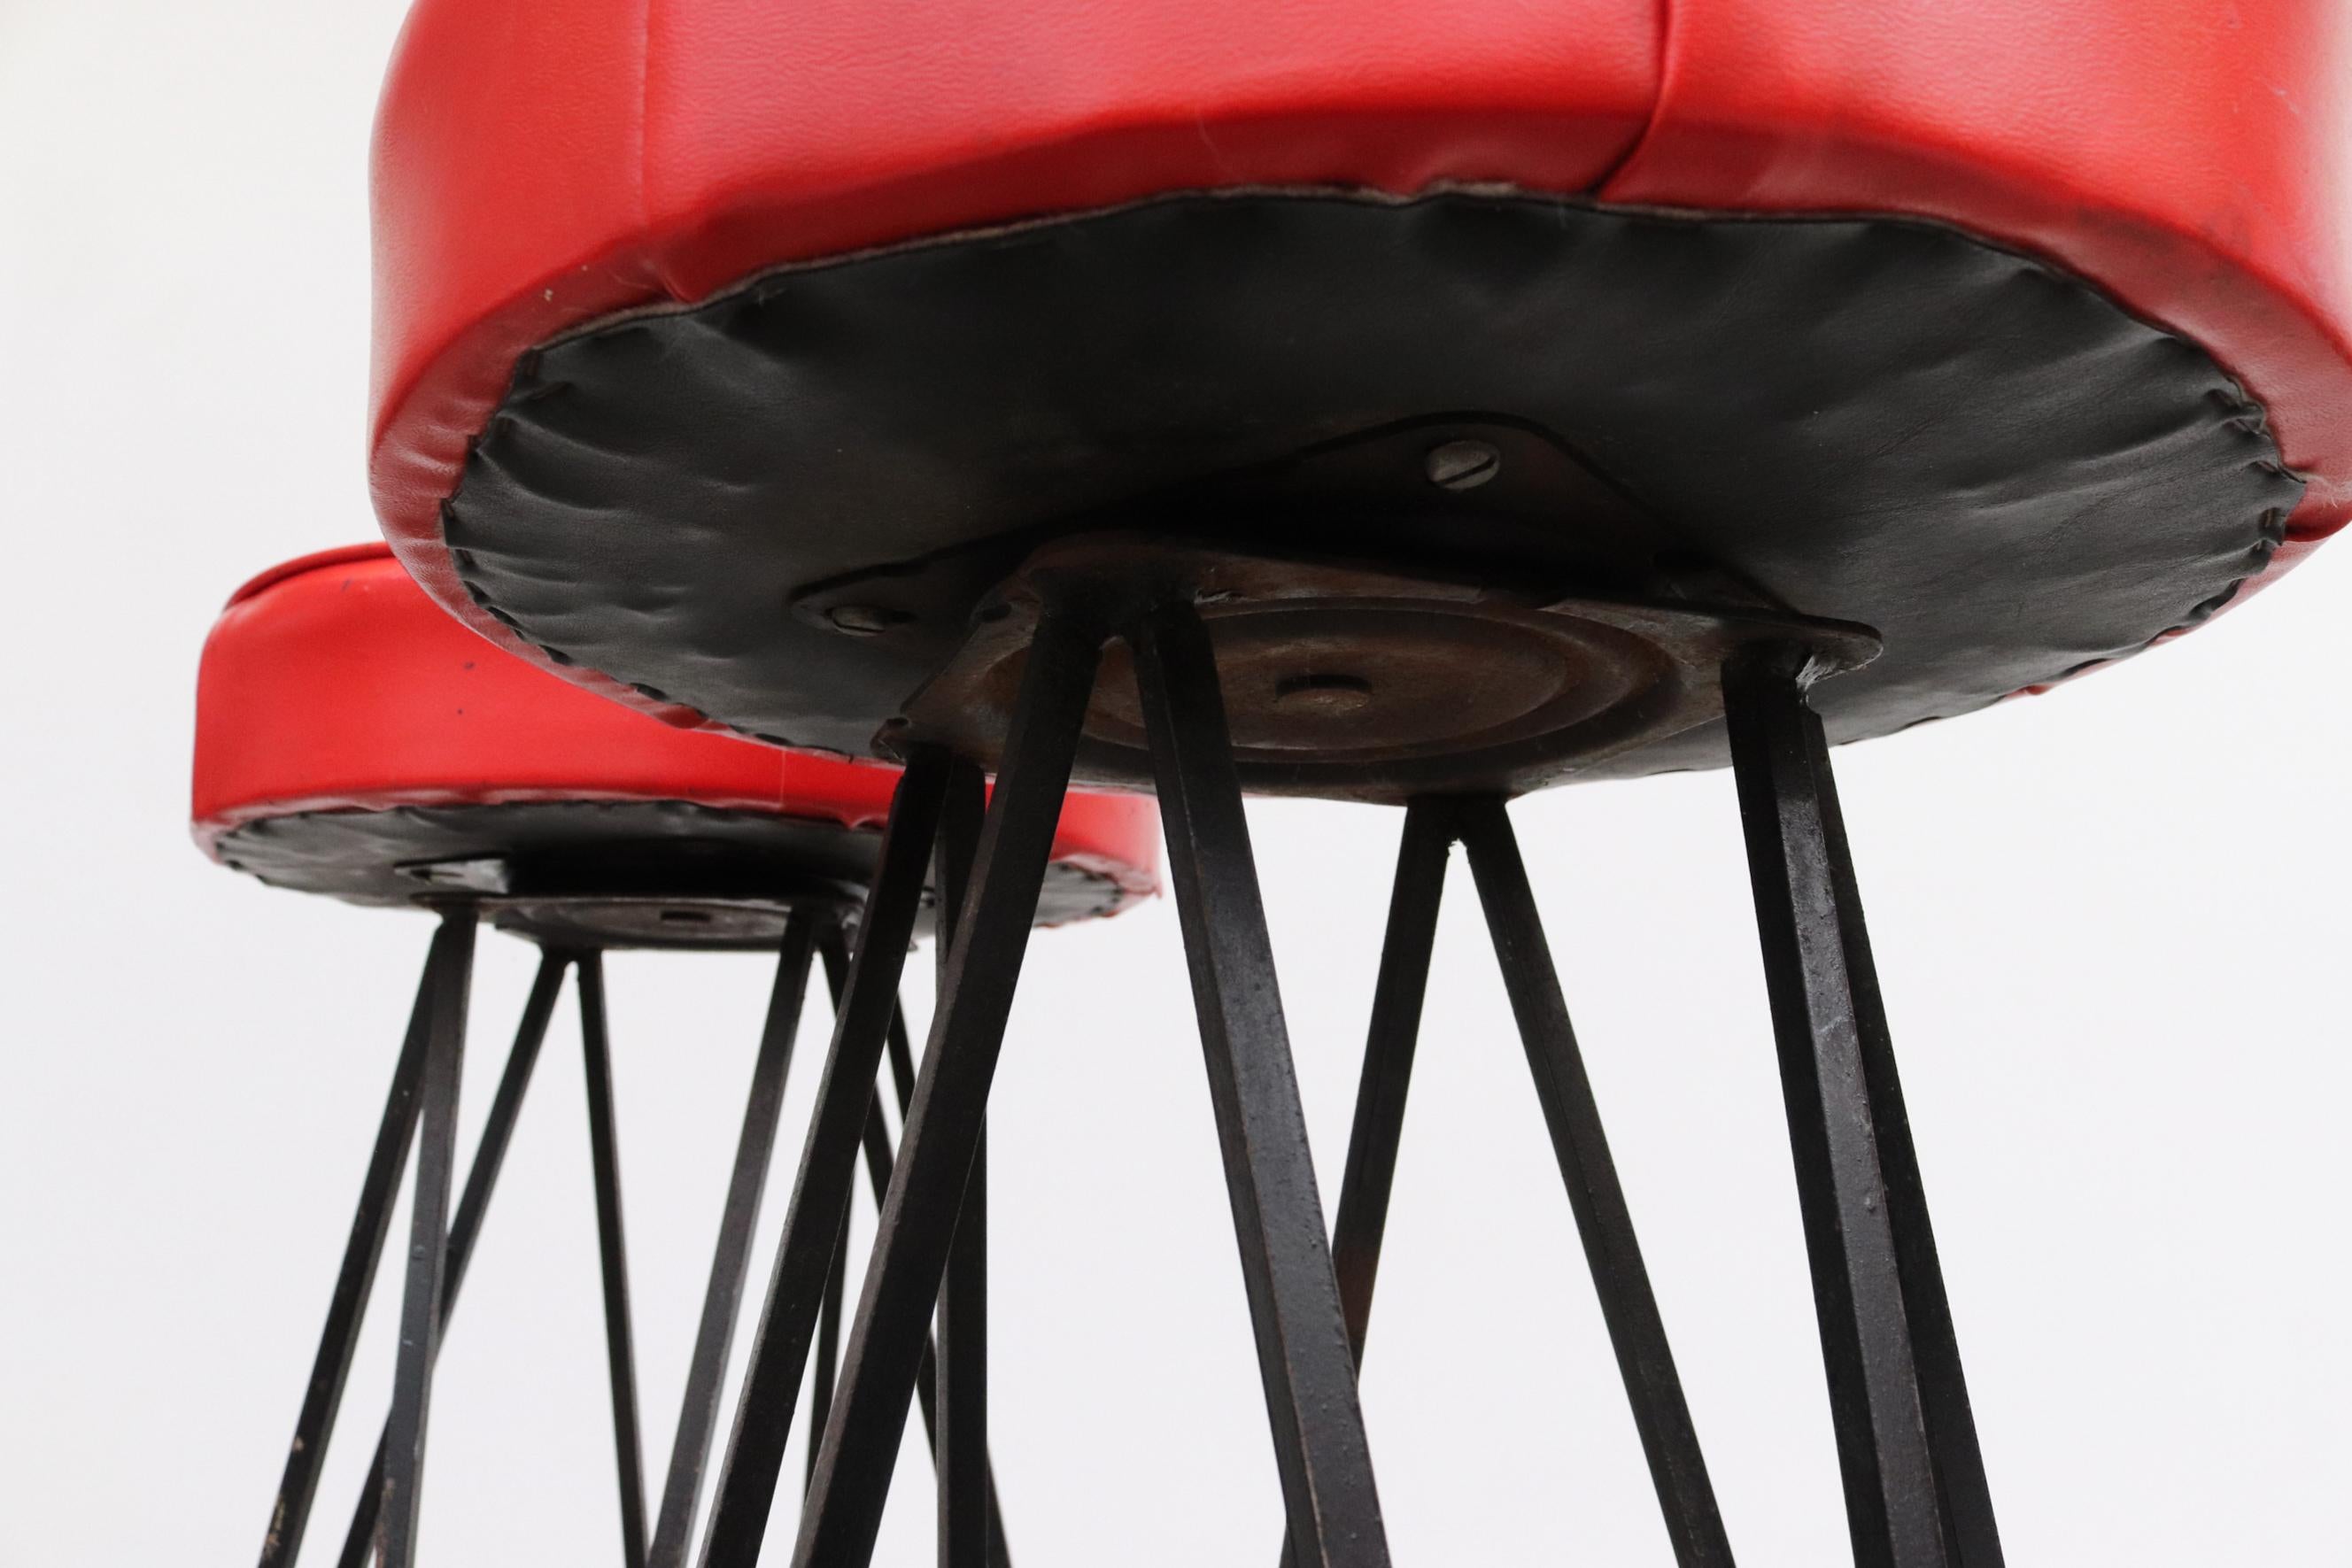 Pair of Retro 50's Round Red Skai Bar Height Stools with Black Base and Legs For Sale 2